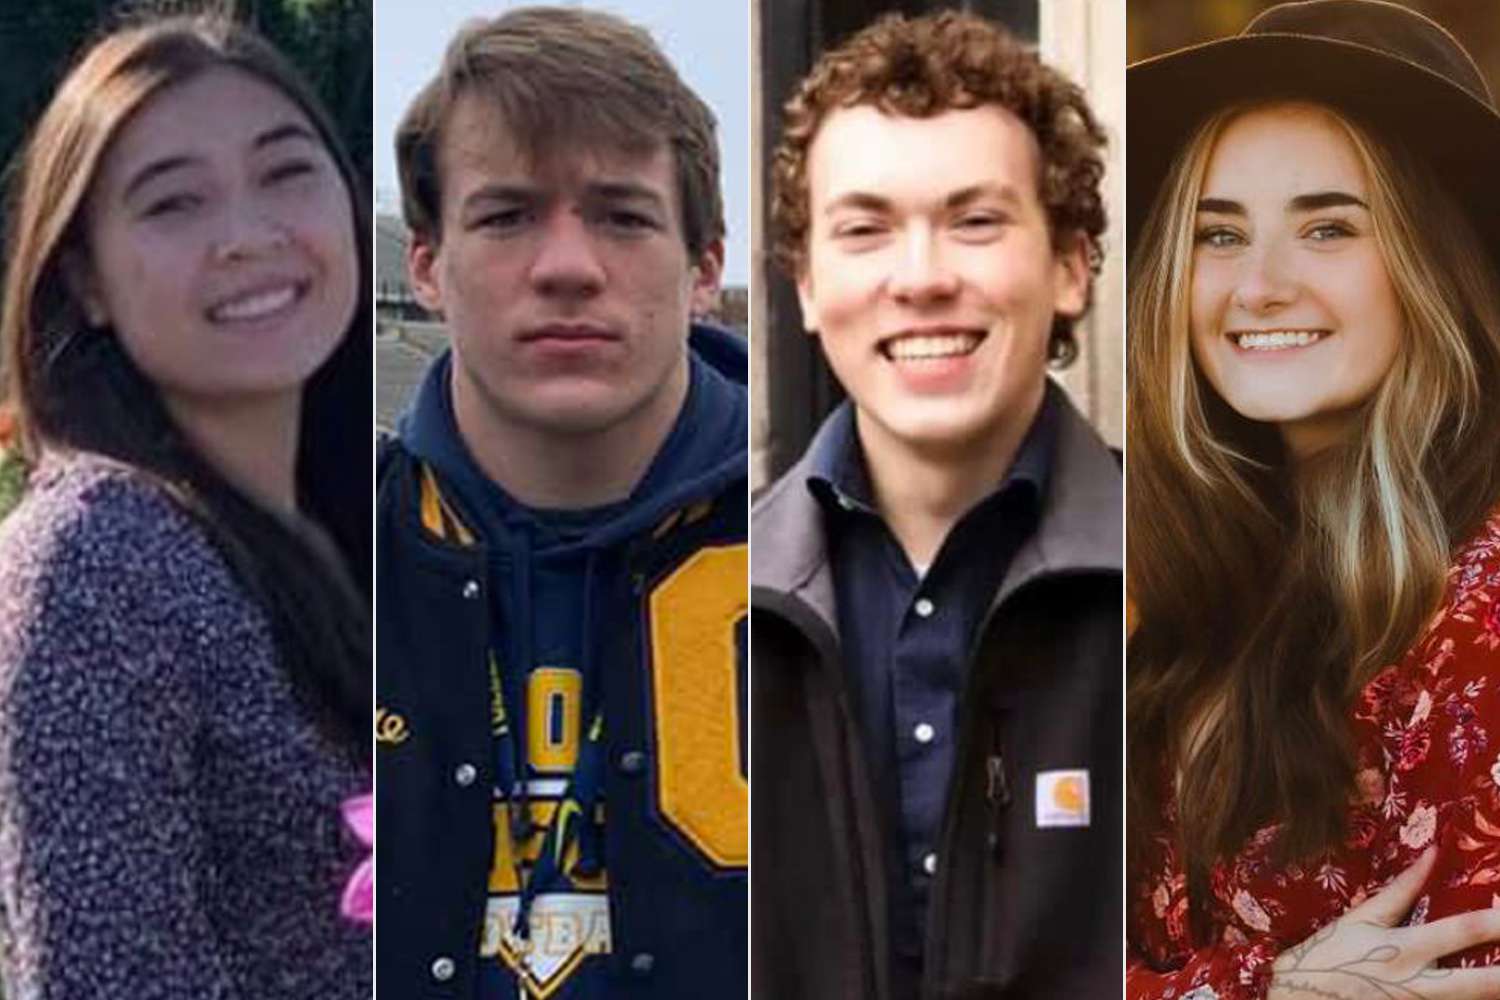 Family of Mich. School Shooting Victims Speak Out [Video]